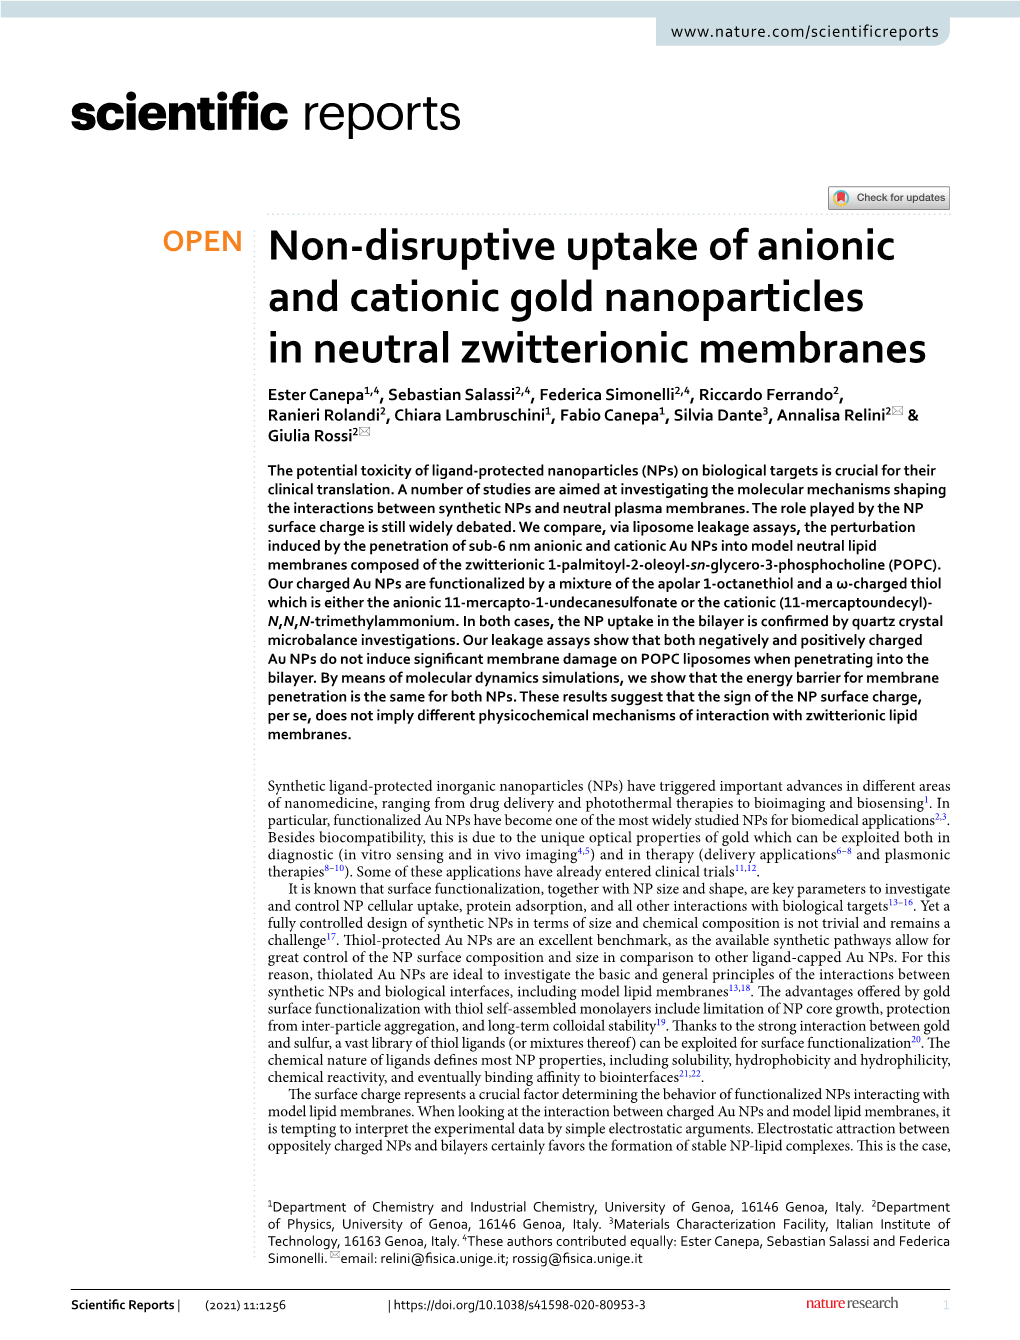 Non-Disruptive Uptake of Anionic and Cationic Gold Nanoparticles